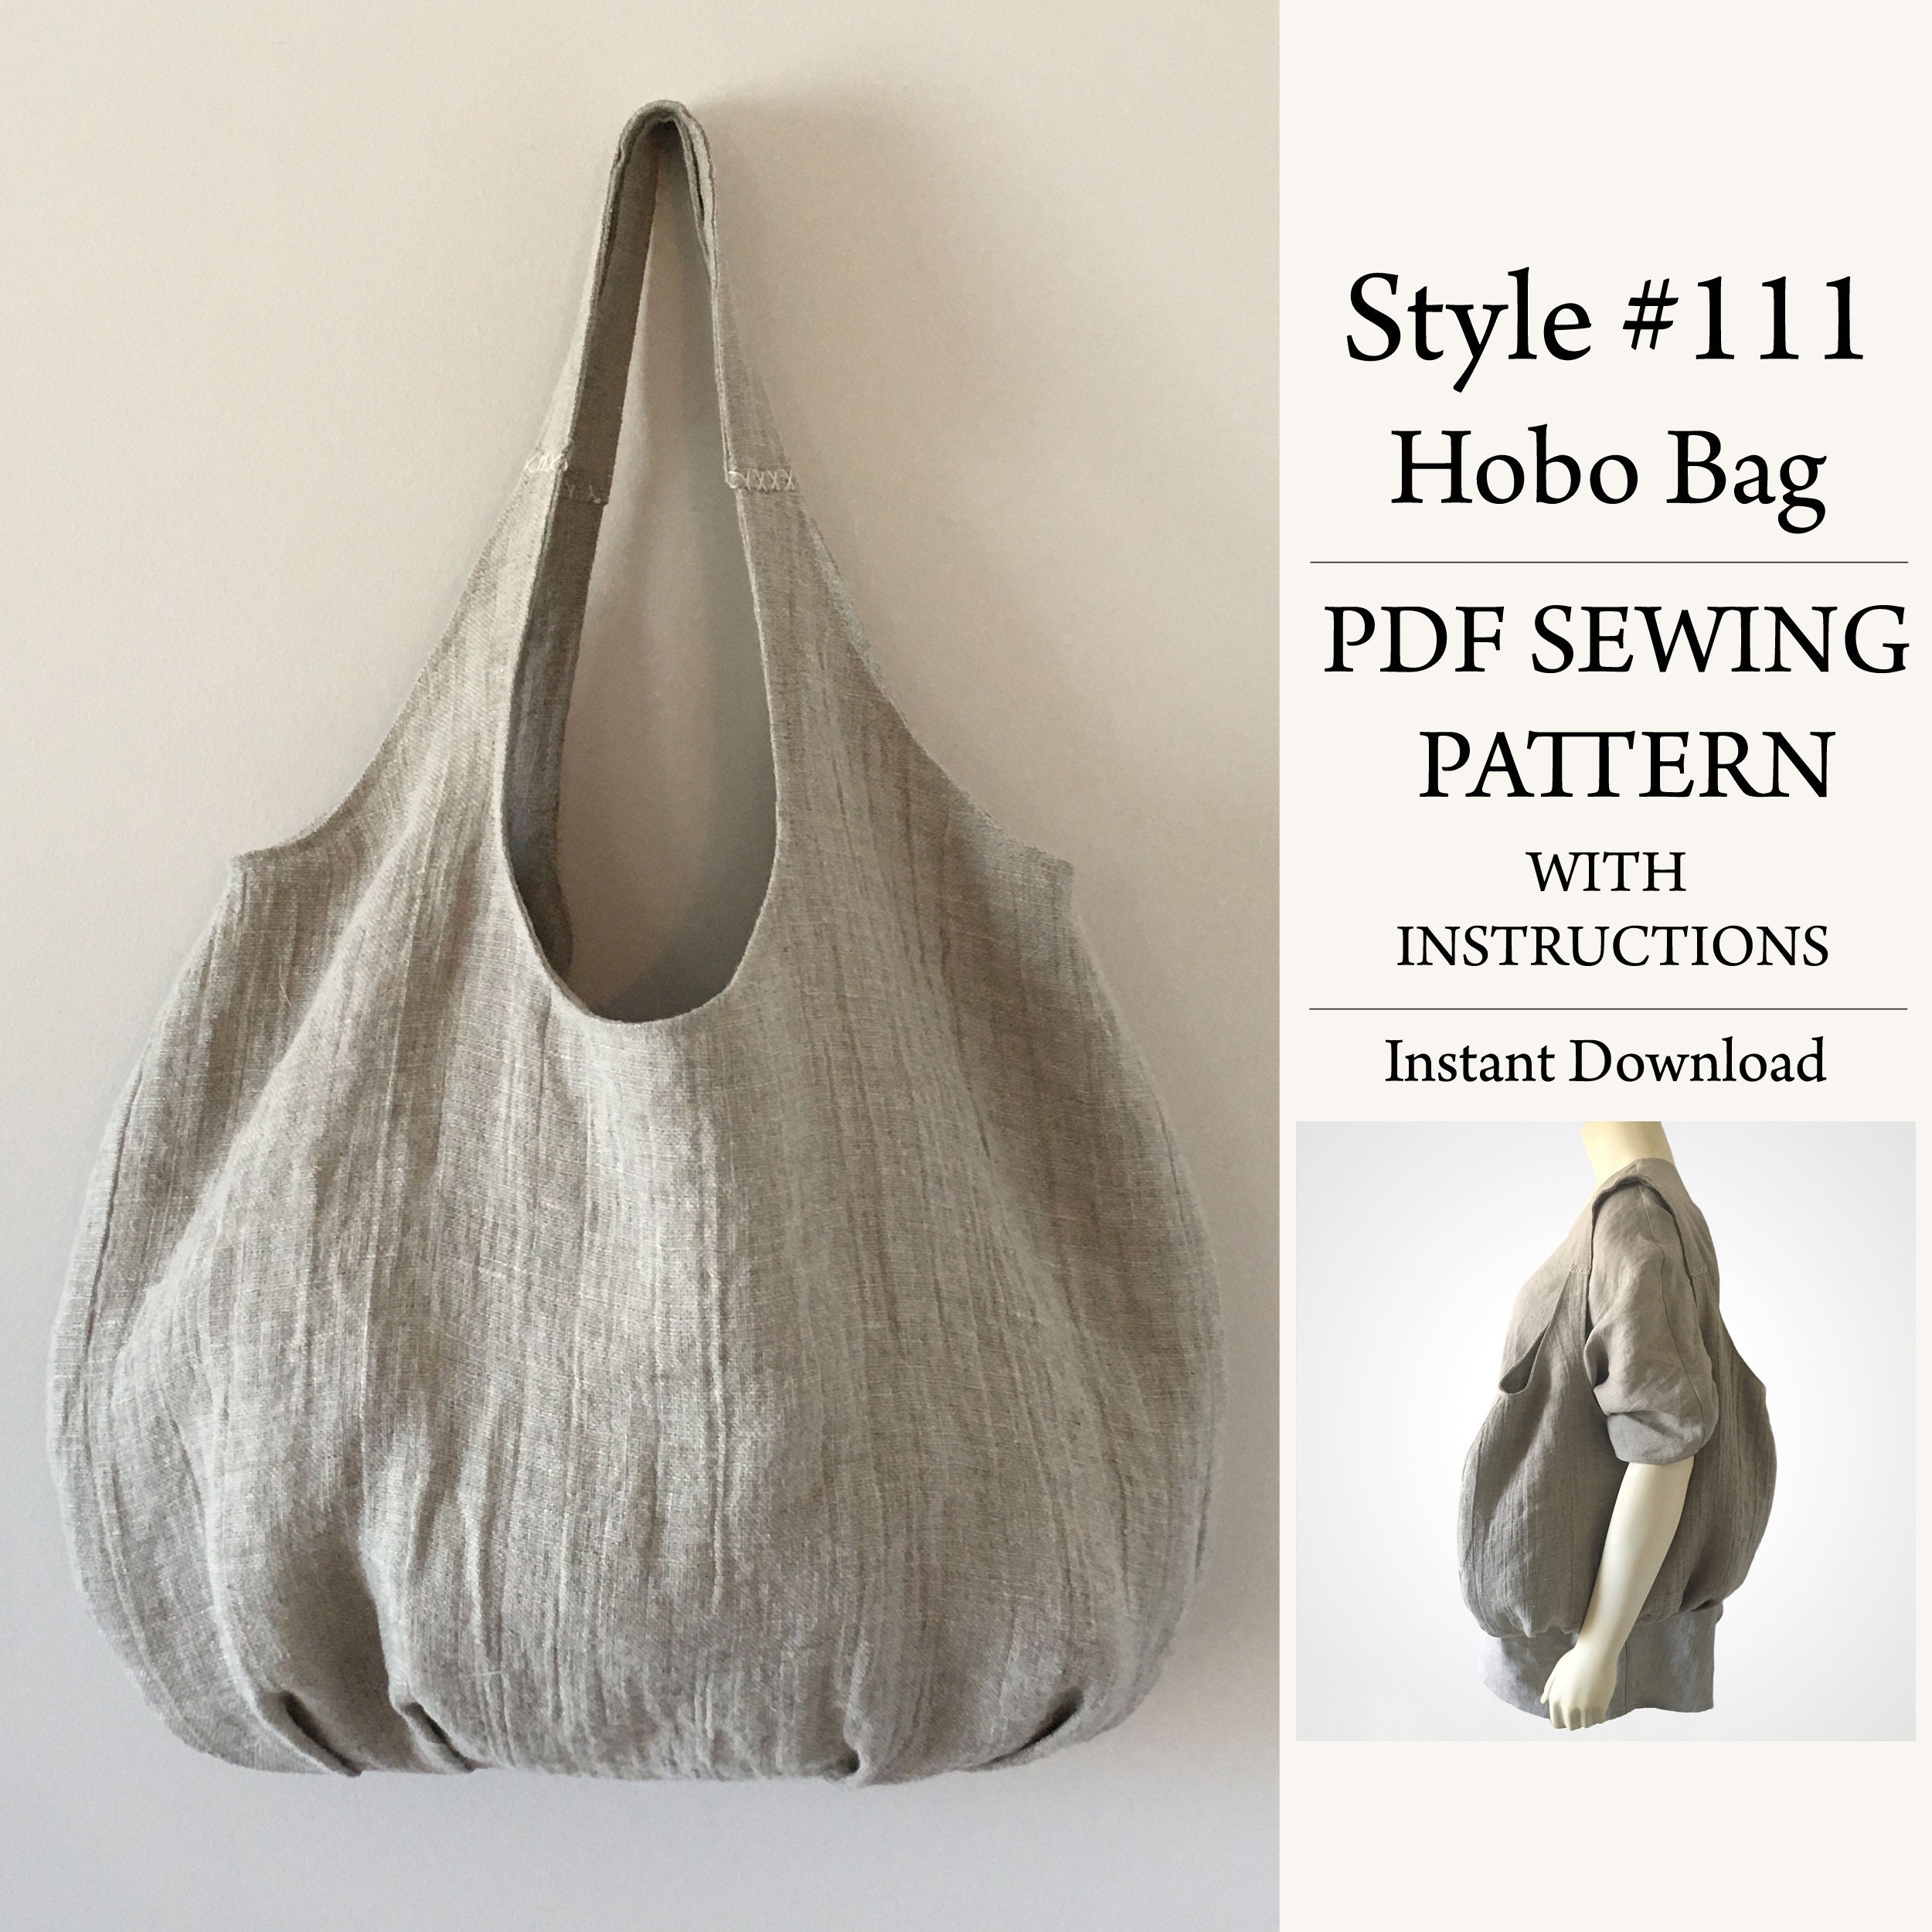 Reusable Grocery Bags free sewing pattern in two sizes - Sew Modern Bags